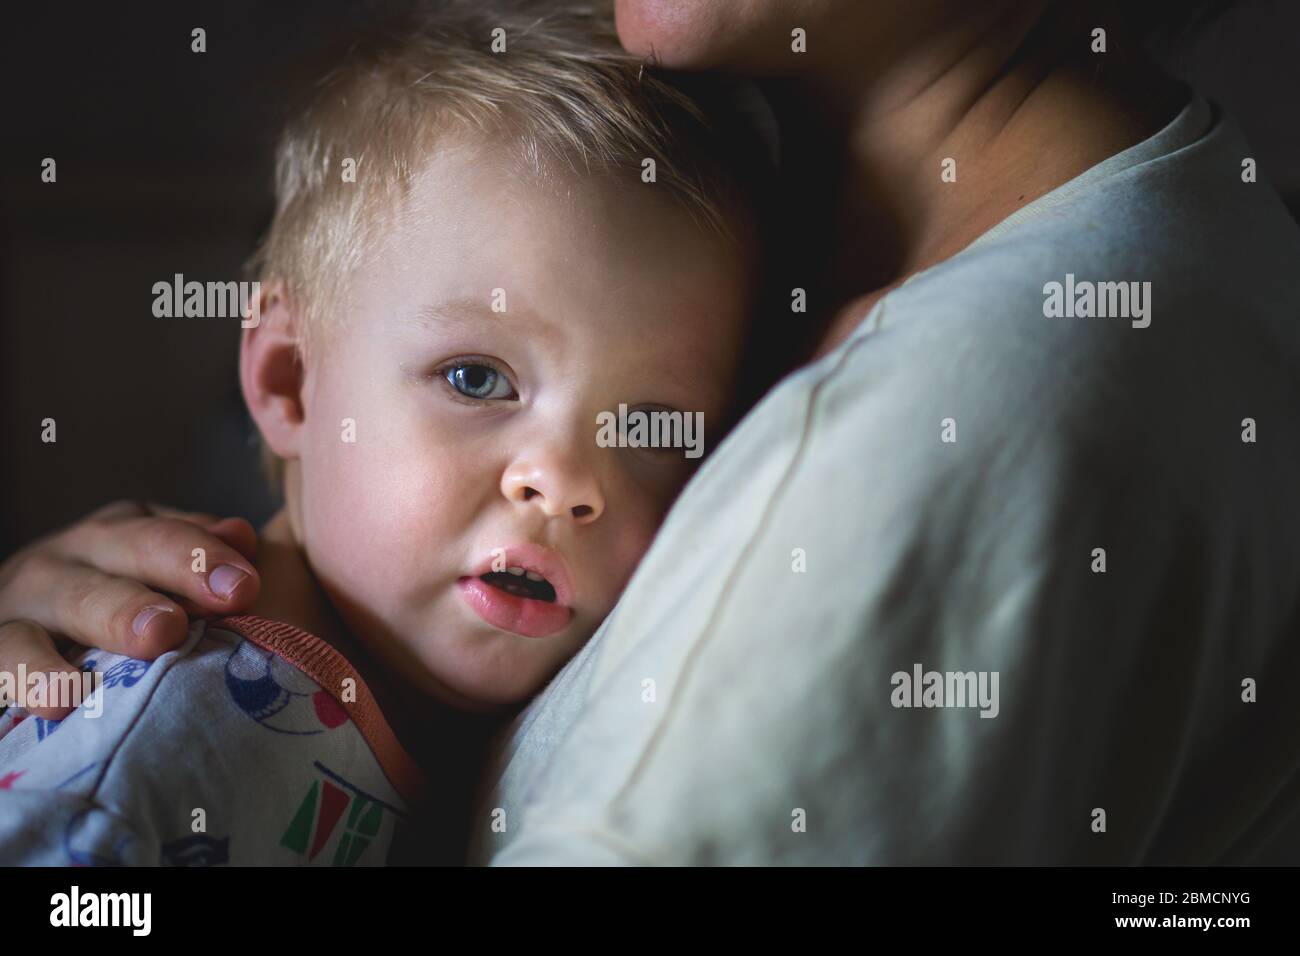 A tearful little boy clings to his mother to calm down. A mother's care and custody. The relationship between parents and children Stock Photo